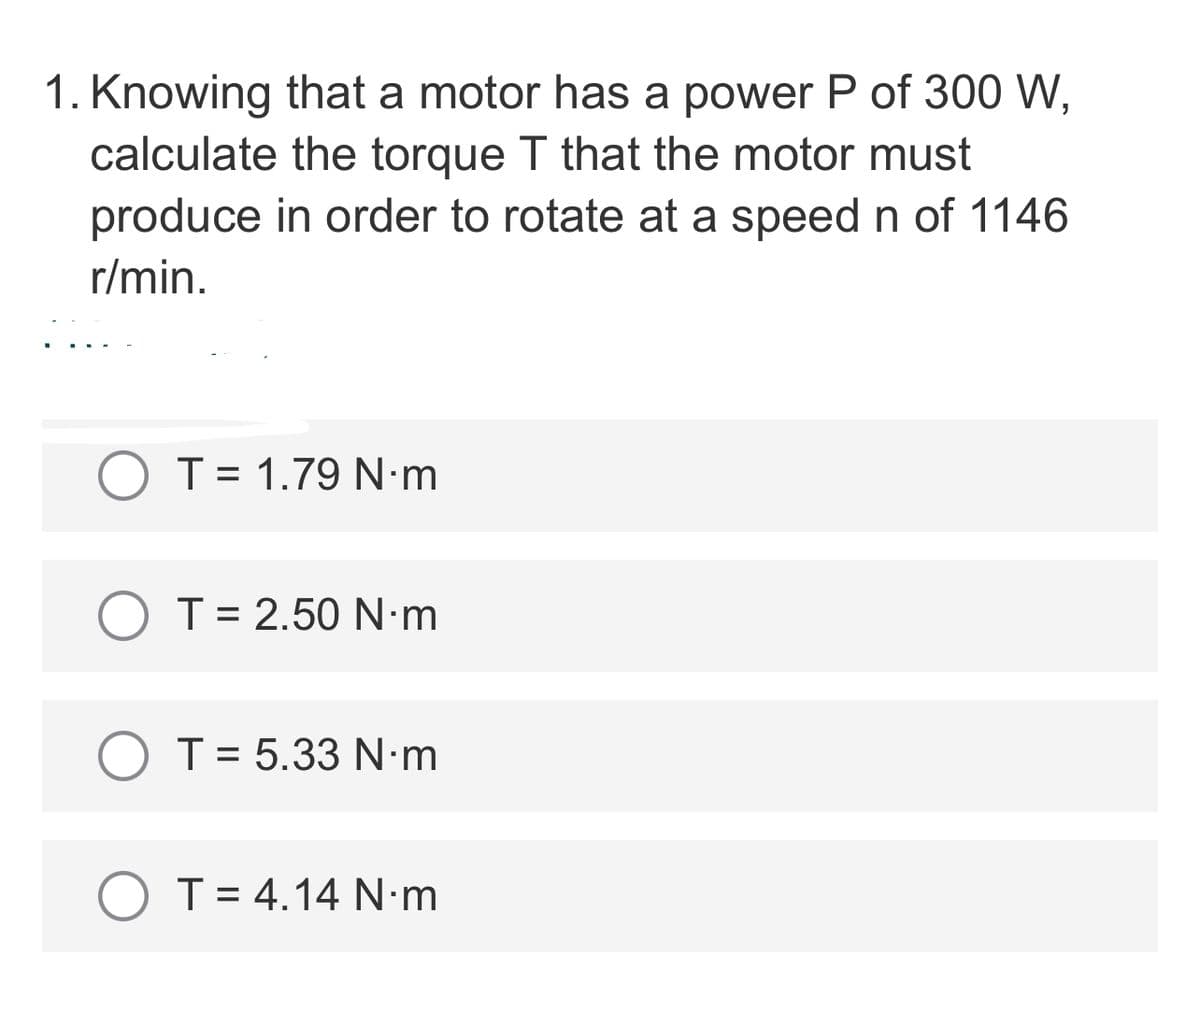 1. Knowing that a motor has a power P of 300 W,
calculate the torque T that the motor must
produce in order to rotate at a speed n of 1146
r/min.
T= 1.79 N·m
O T= 2.50 N•m
O T= 5.33 N•m
O T= 4.14 N-m
